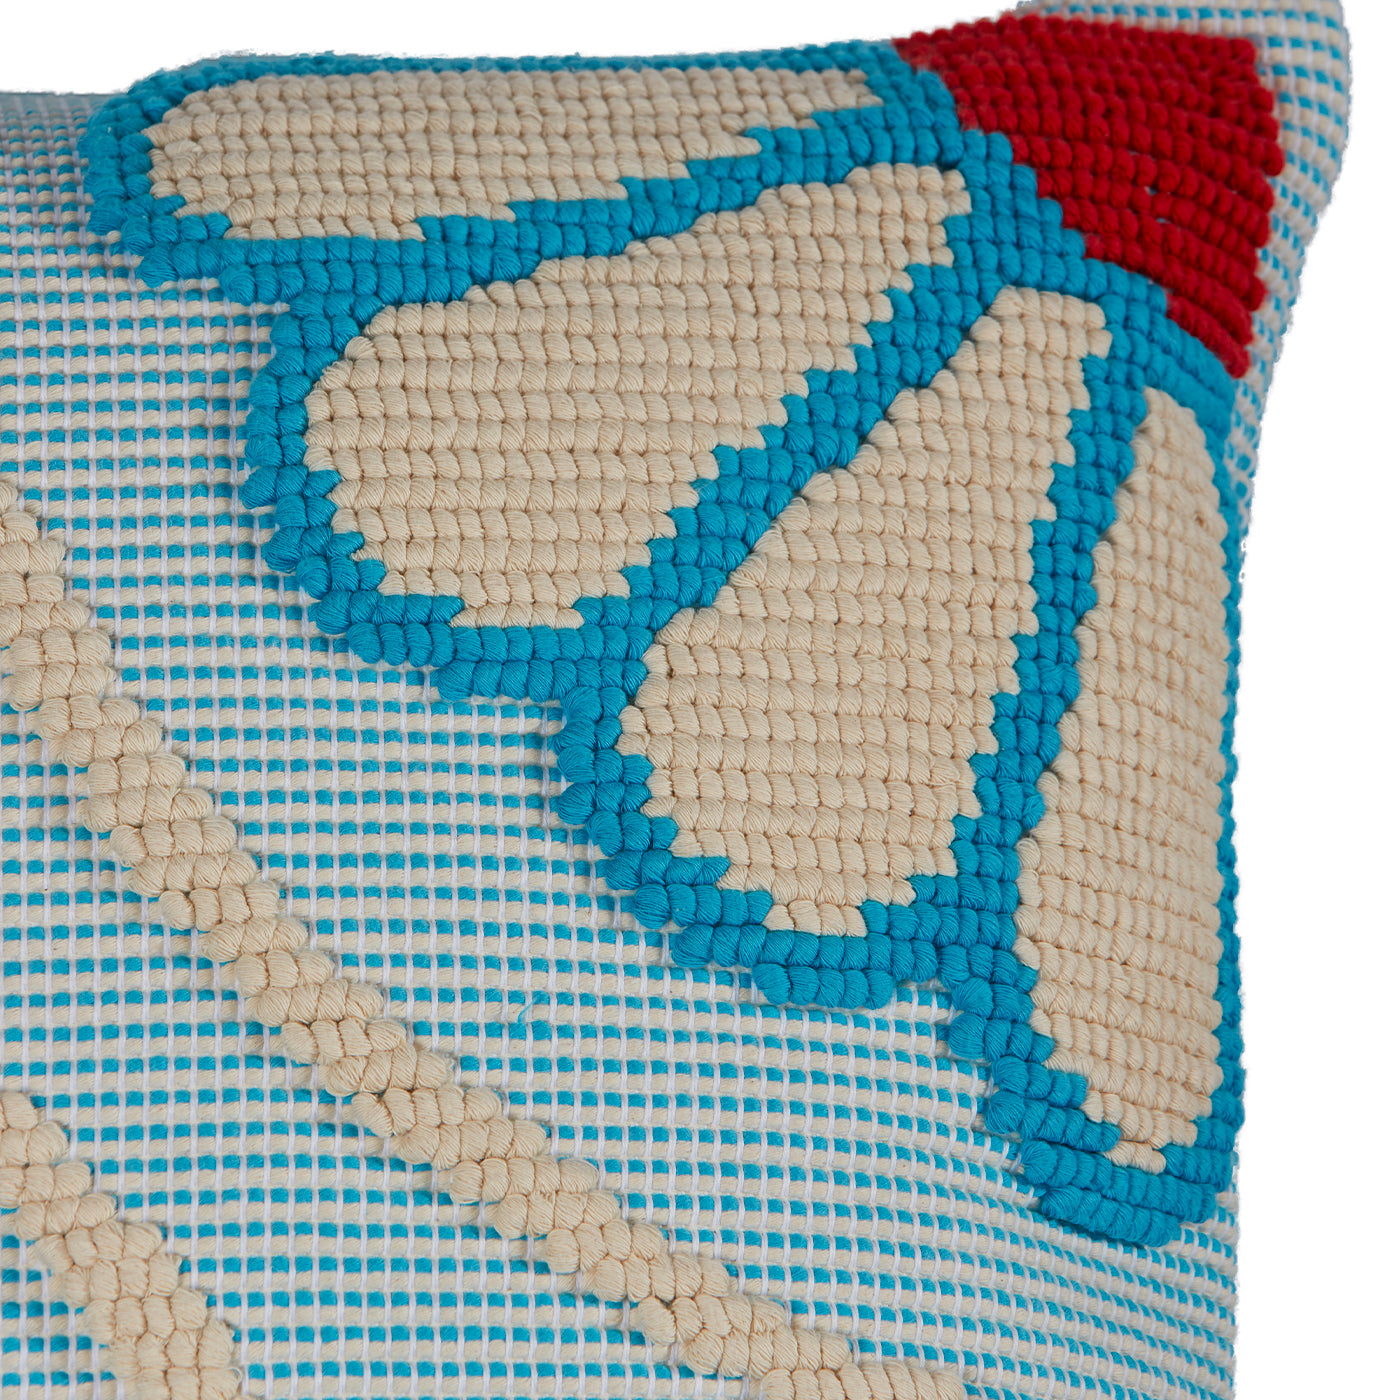 Margherita Square Turquoise Cushion Cover by Carlo Sanna - Alternative view 1